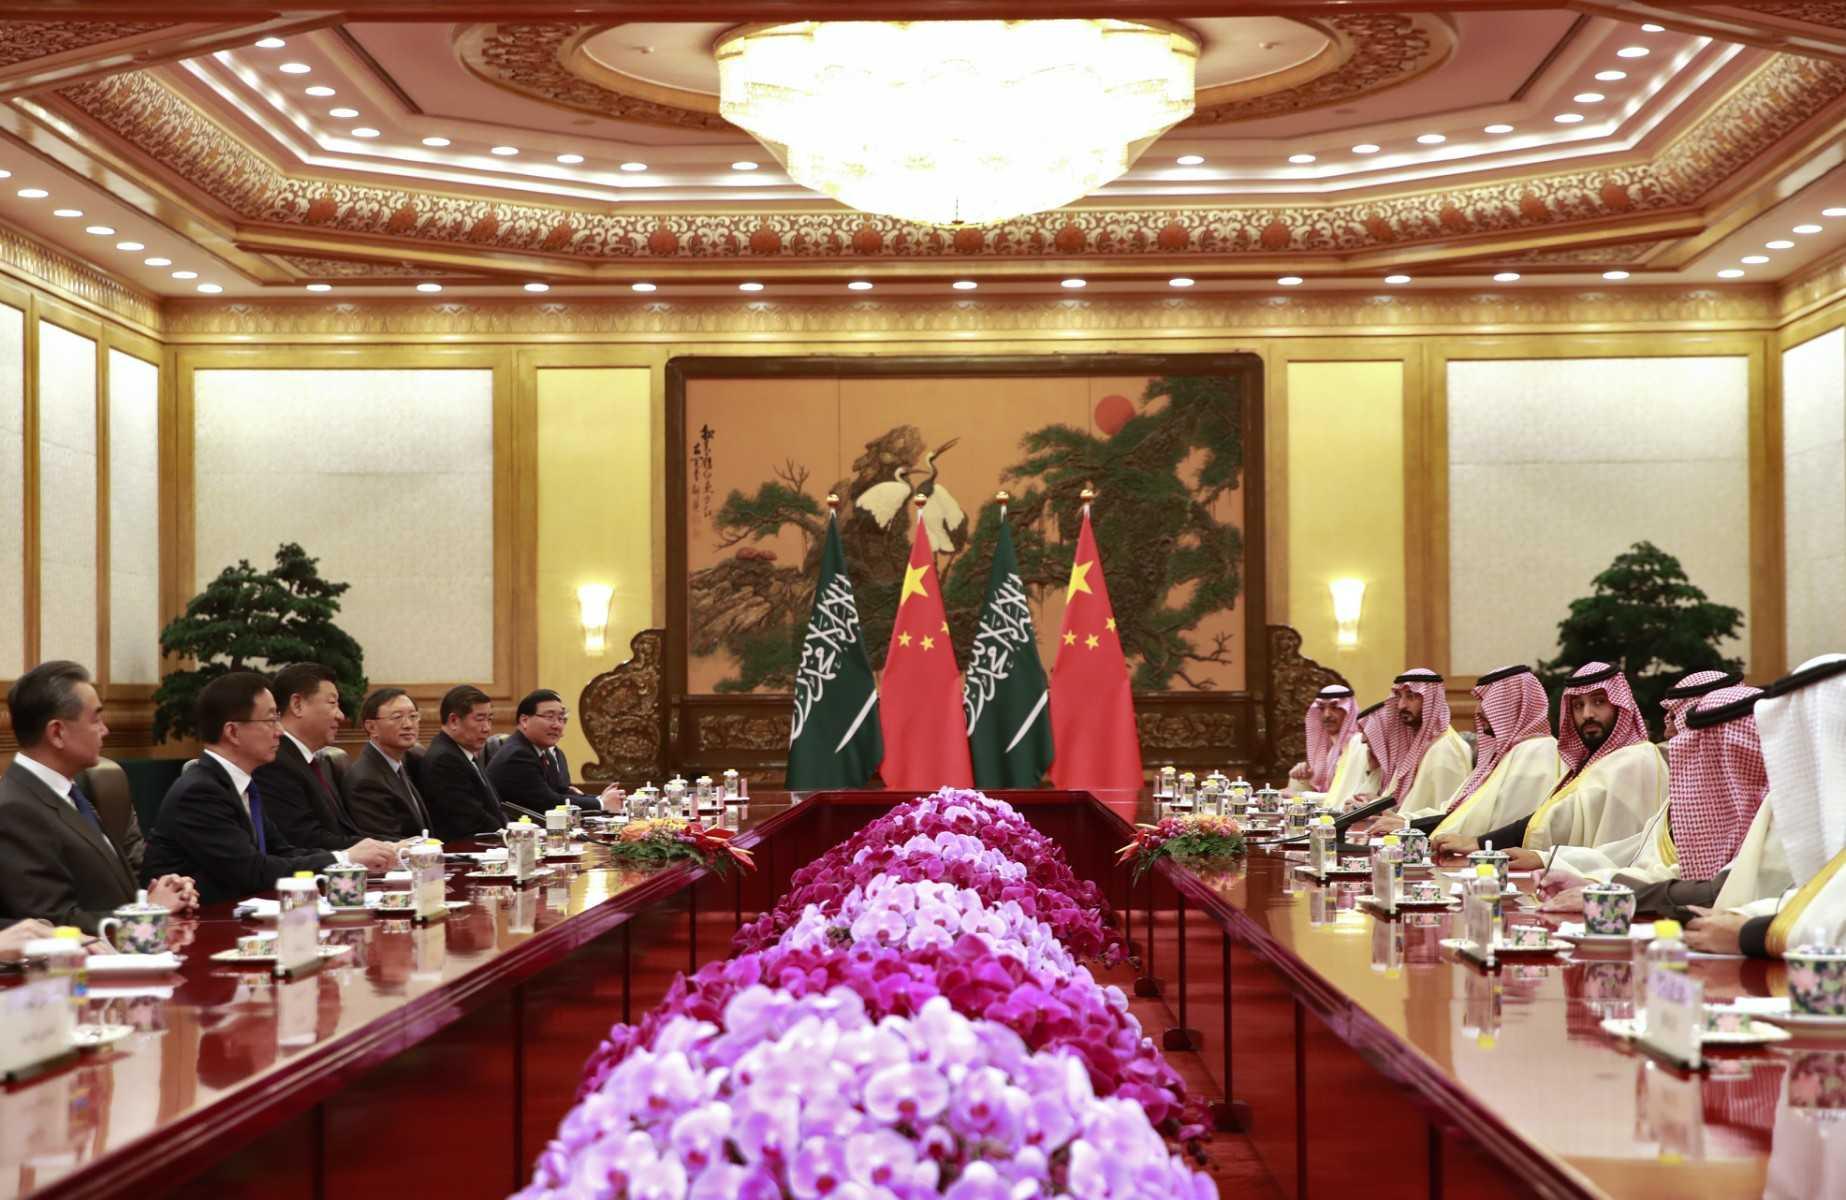 Saudi Crown Prince Mohammed bin Salman (fourth right) attends a meeting with Chinese President Xi Jinping (third left) at the Great Hall of the People in Beijing on Feb 22, 2019. Photo: AFP